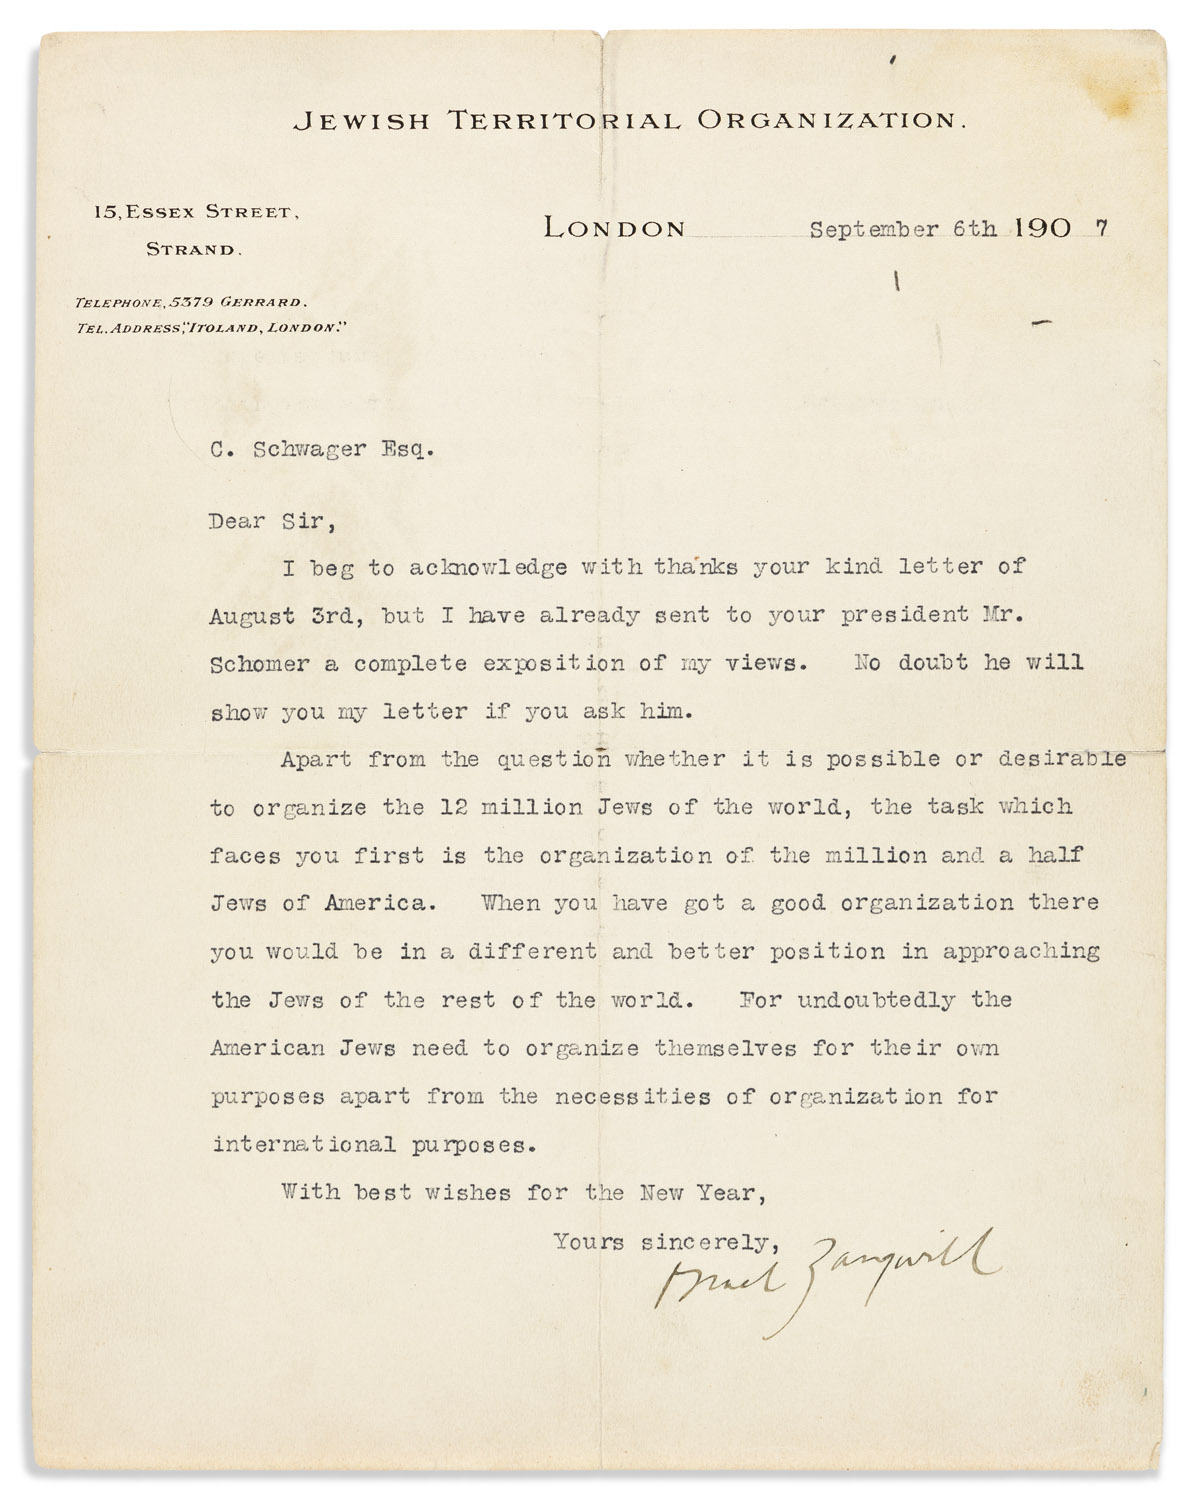 ZANGWILL, ISRAEL. Typed Letter Signed, to Charles Schwager,